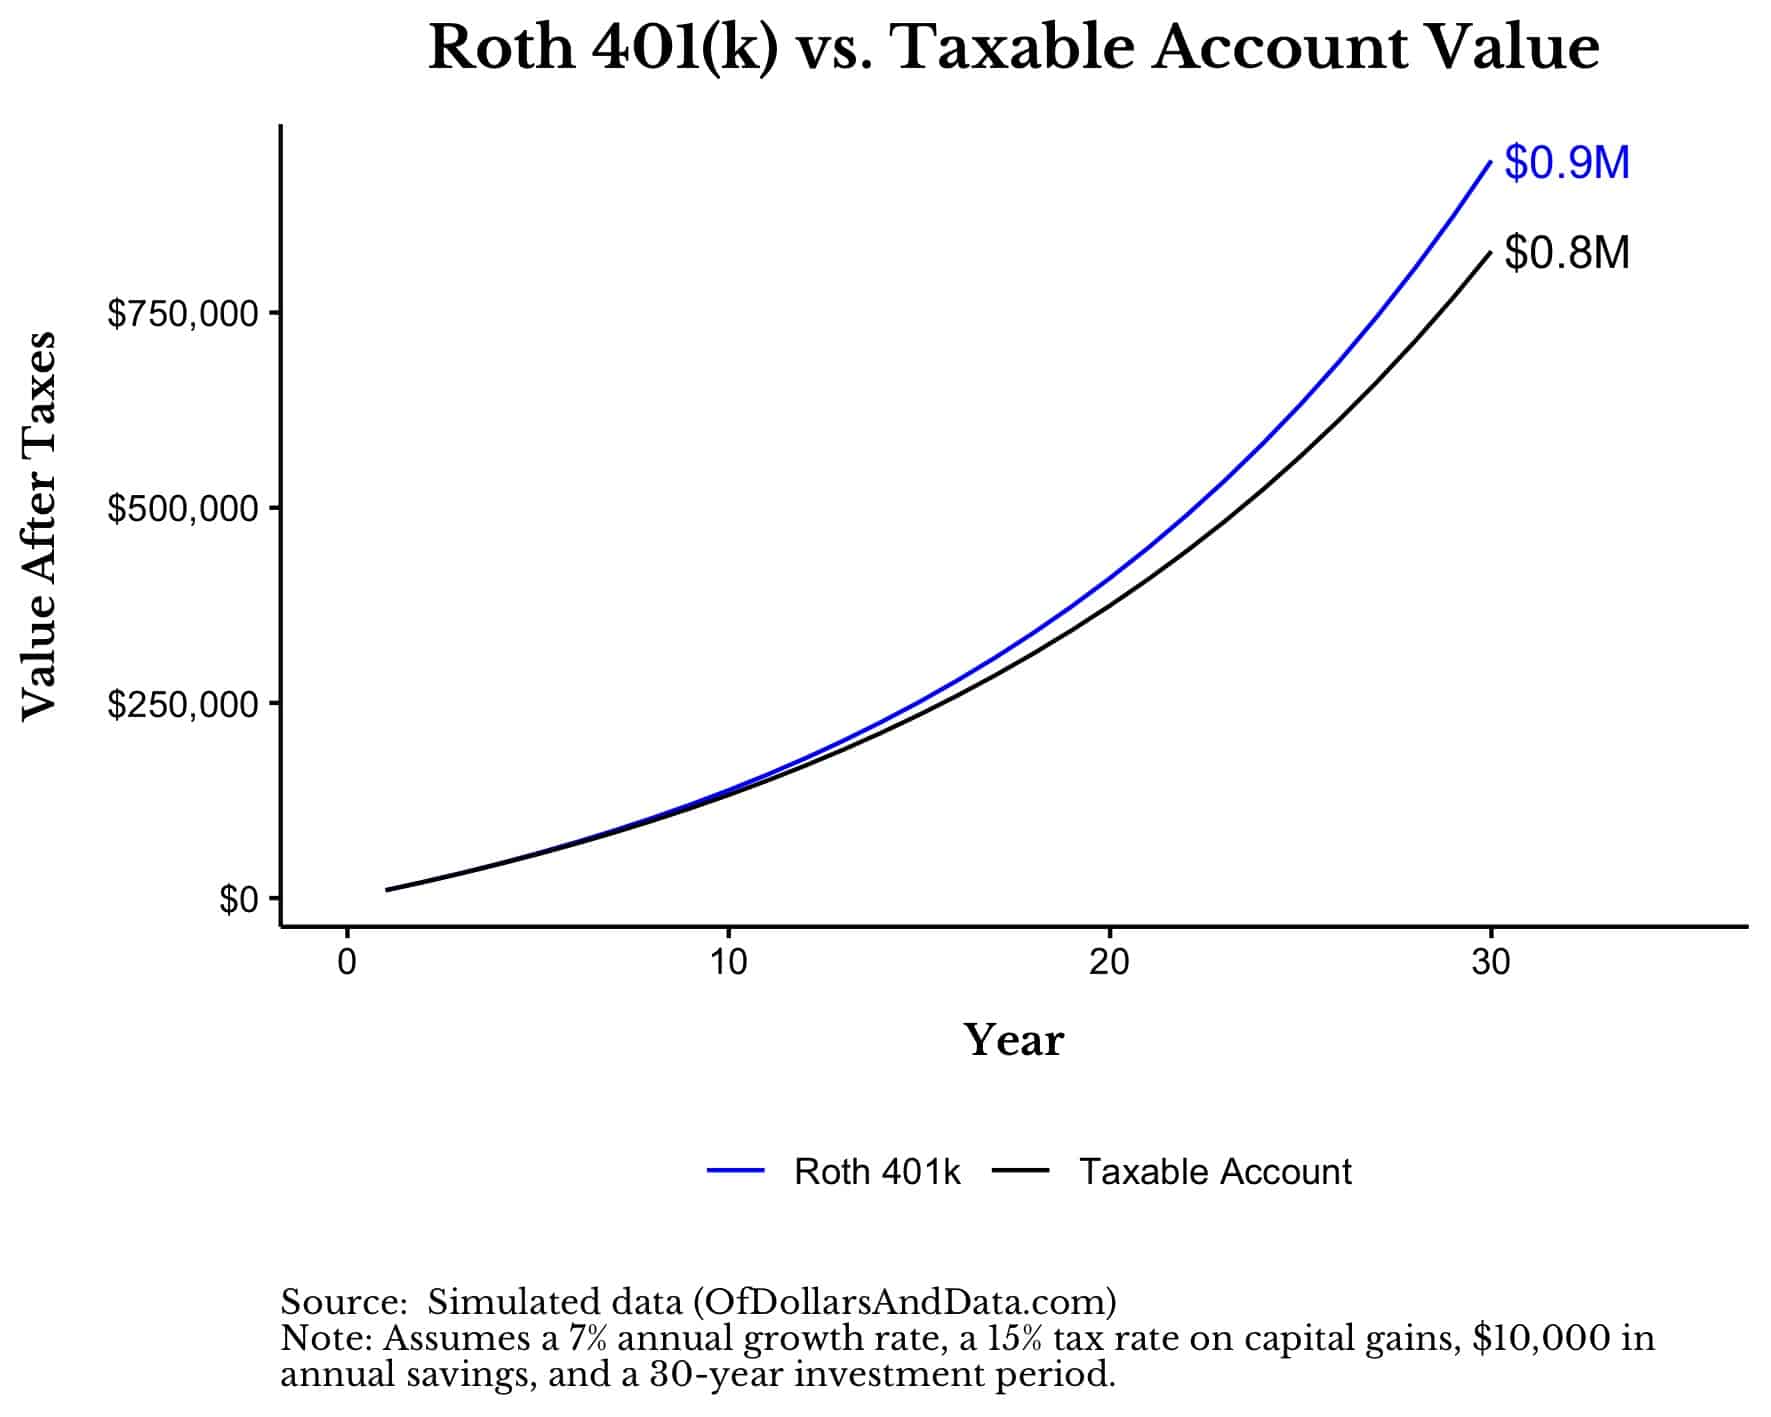 Chart that helps to answer the question, "should I max out my 401k?" by comparing the growth in a Roth 401k vs. taxable account over 30 years.